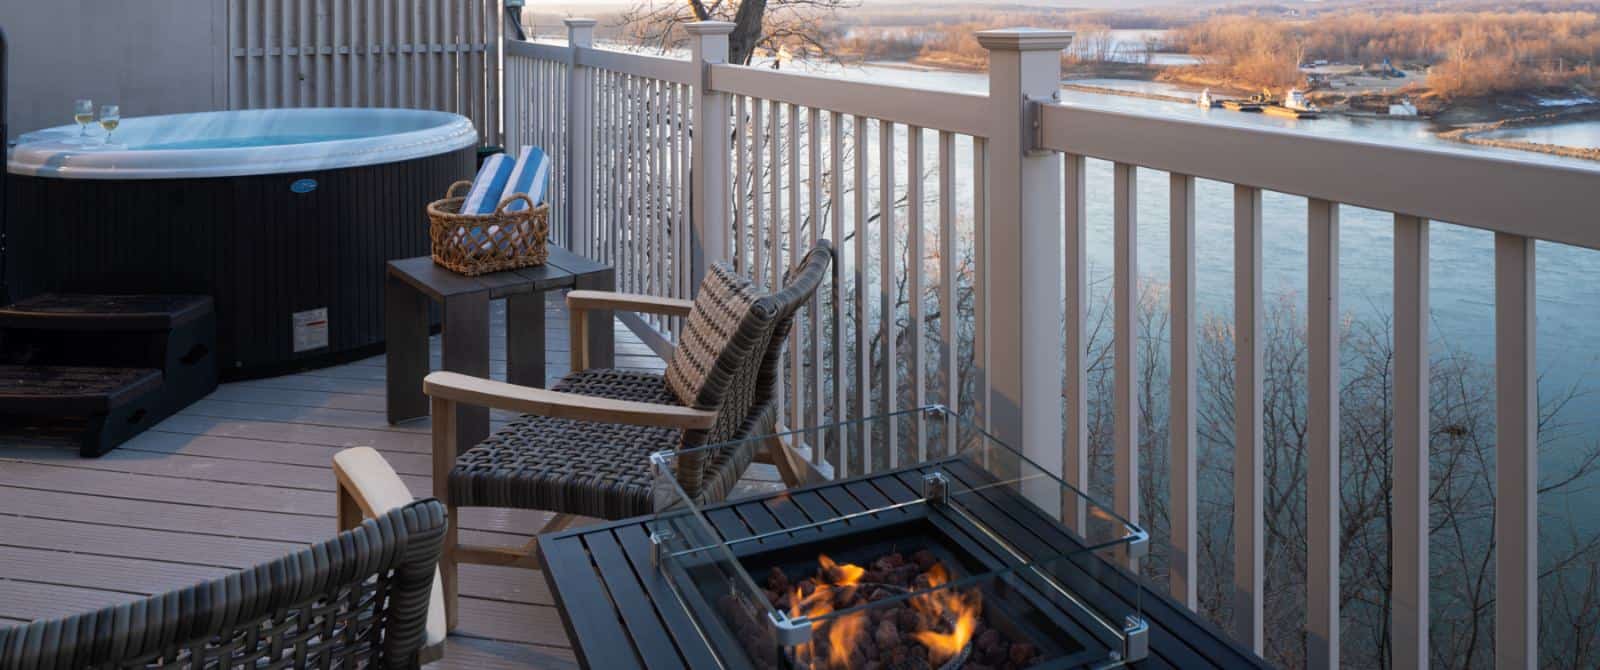 Deck with lighted table fire pit, wicker patio chairs, small jetted tub, and view of river in the background